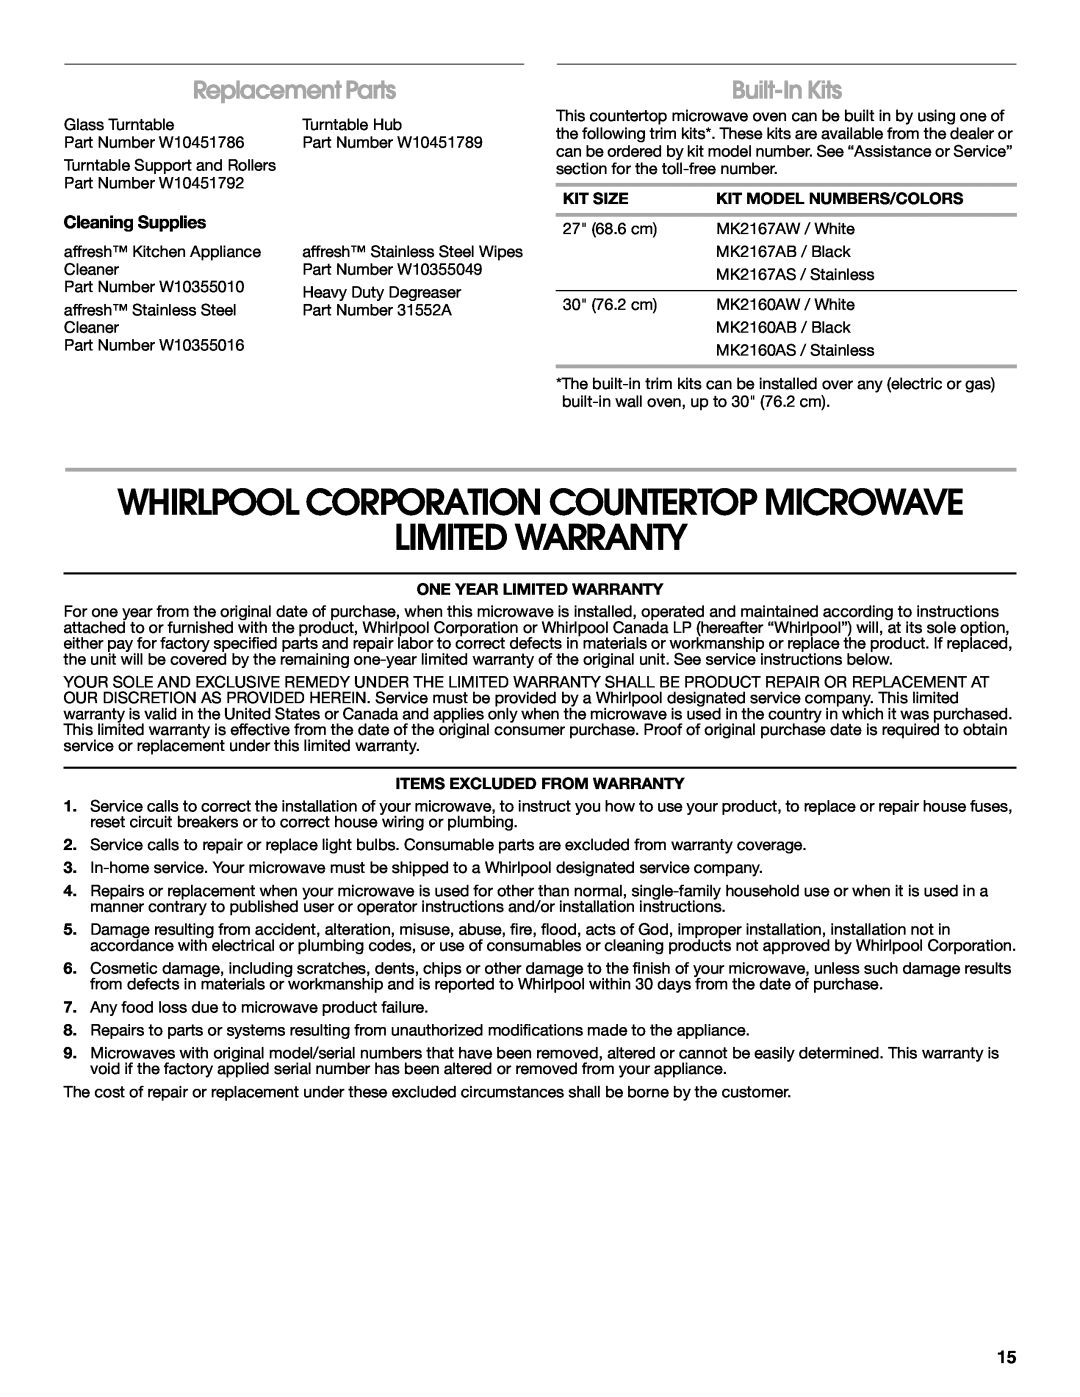 Whirlpool UMC5165 Limited Warranty, Replacement Parts, Built-In Kits, Whirlpool Corporation Countertop Microwave, Kit Size 